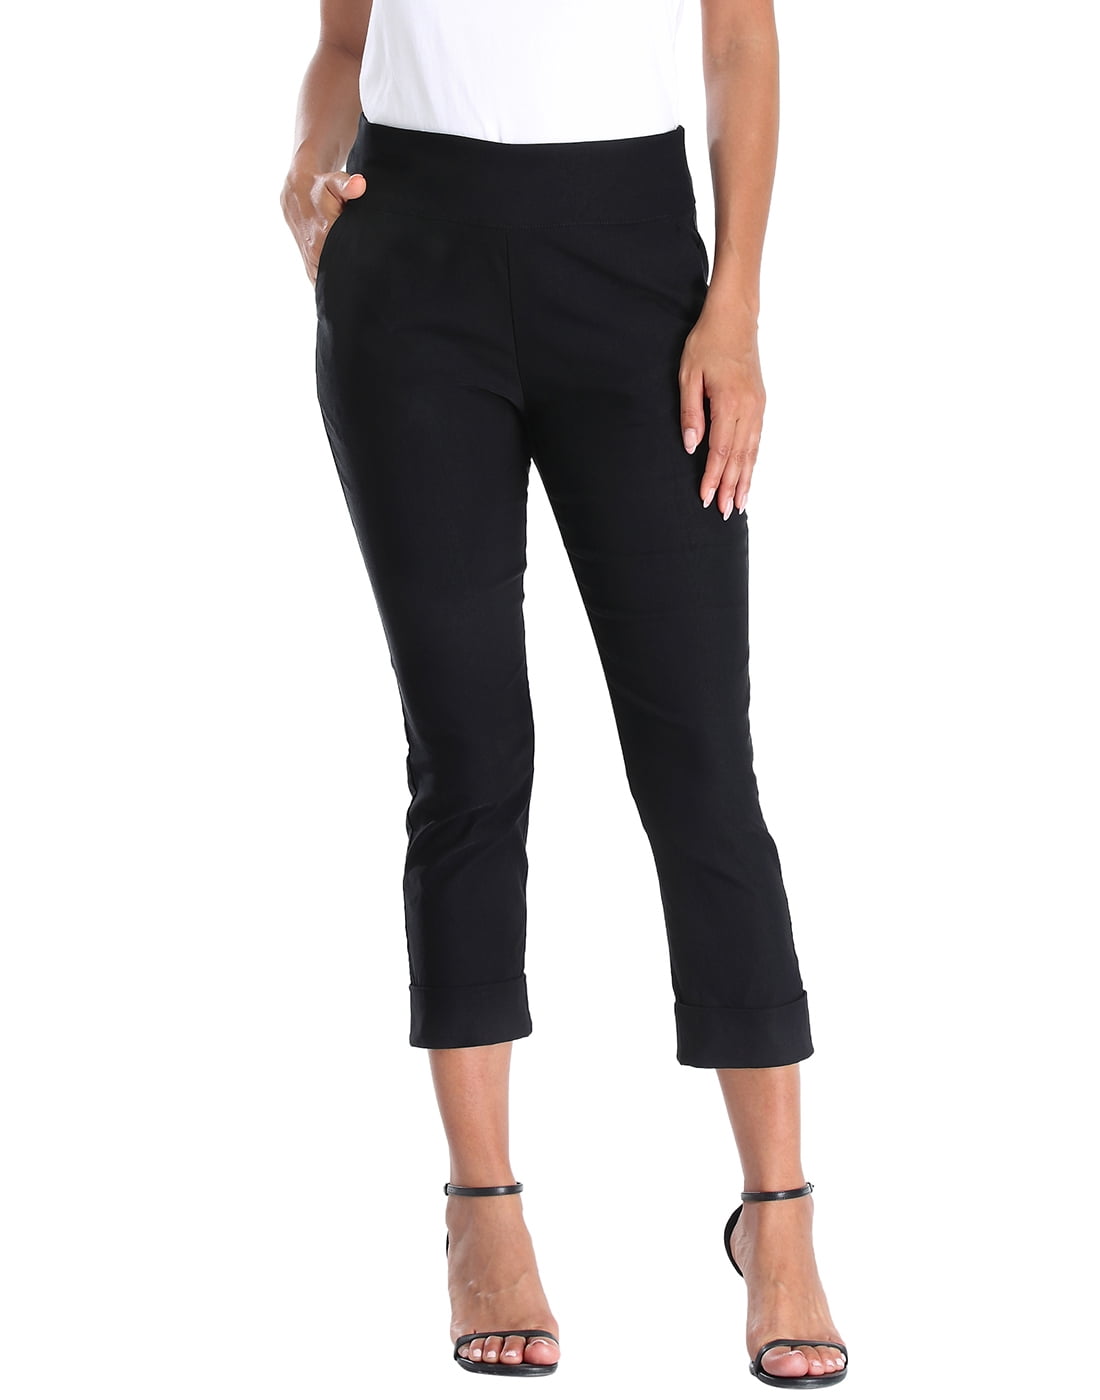 HDE Pull On Capri Pants For Women with Pockets Bangladesh